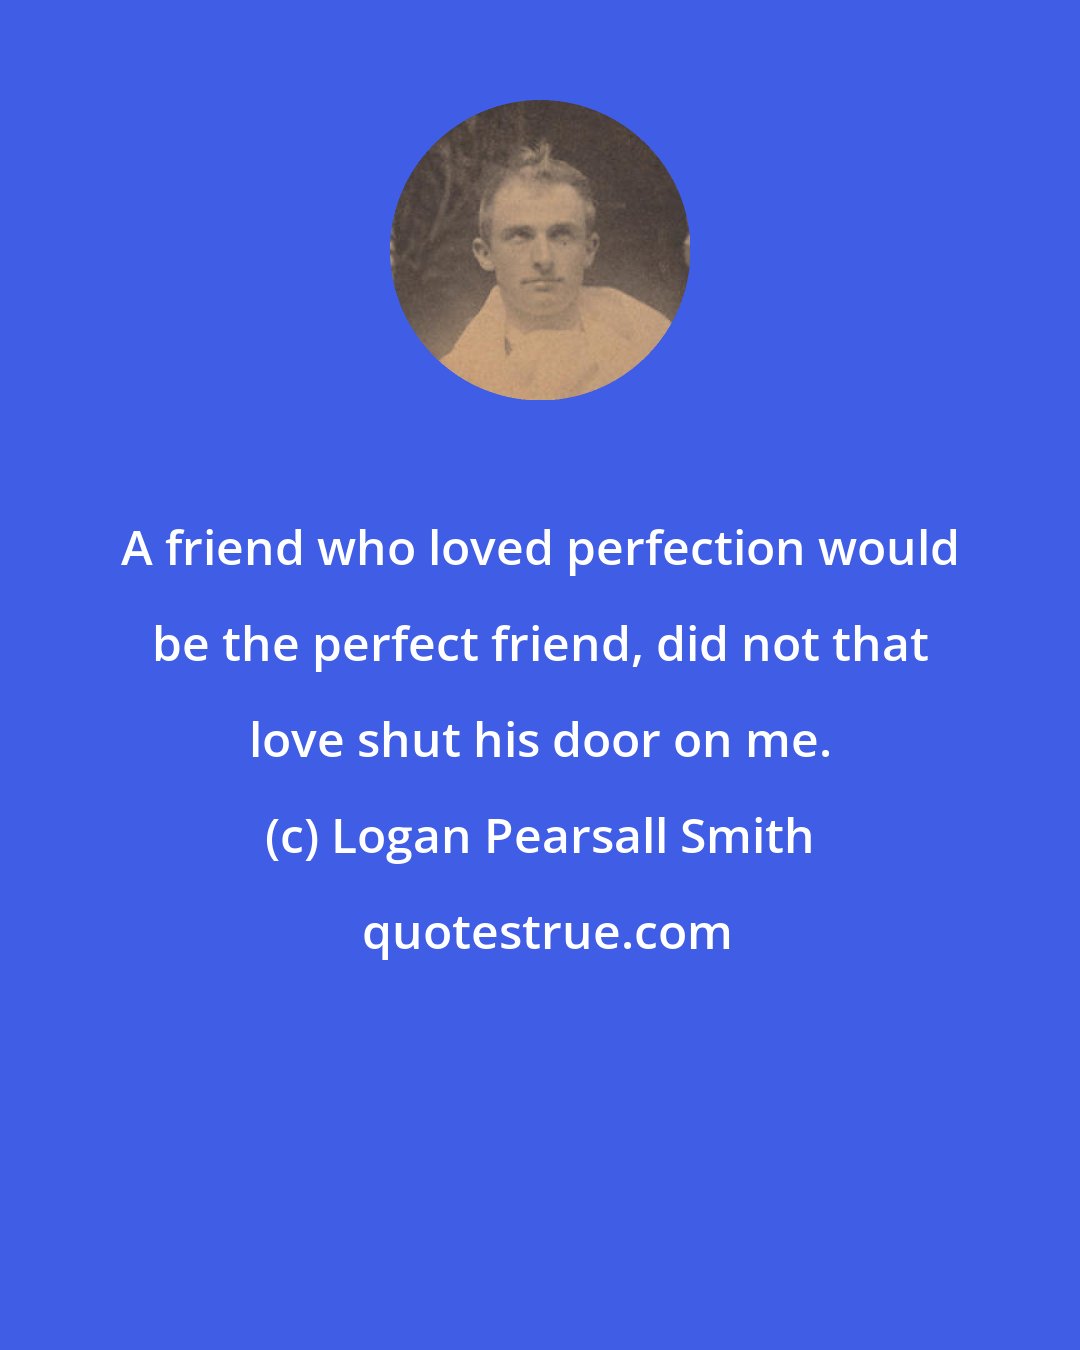 Logan Pearsall Smith: A friend who loved perfection would be the perfect friend, did not that love shut his door on me.